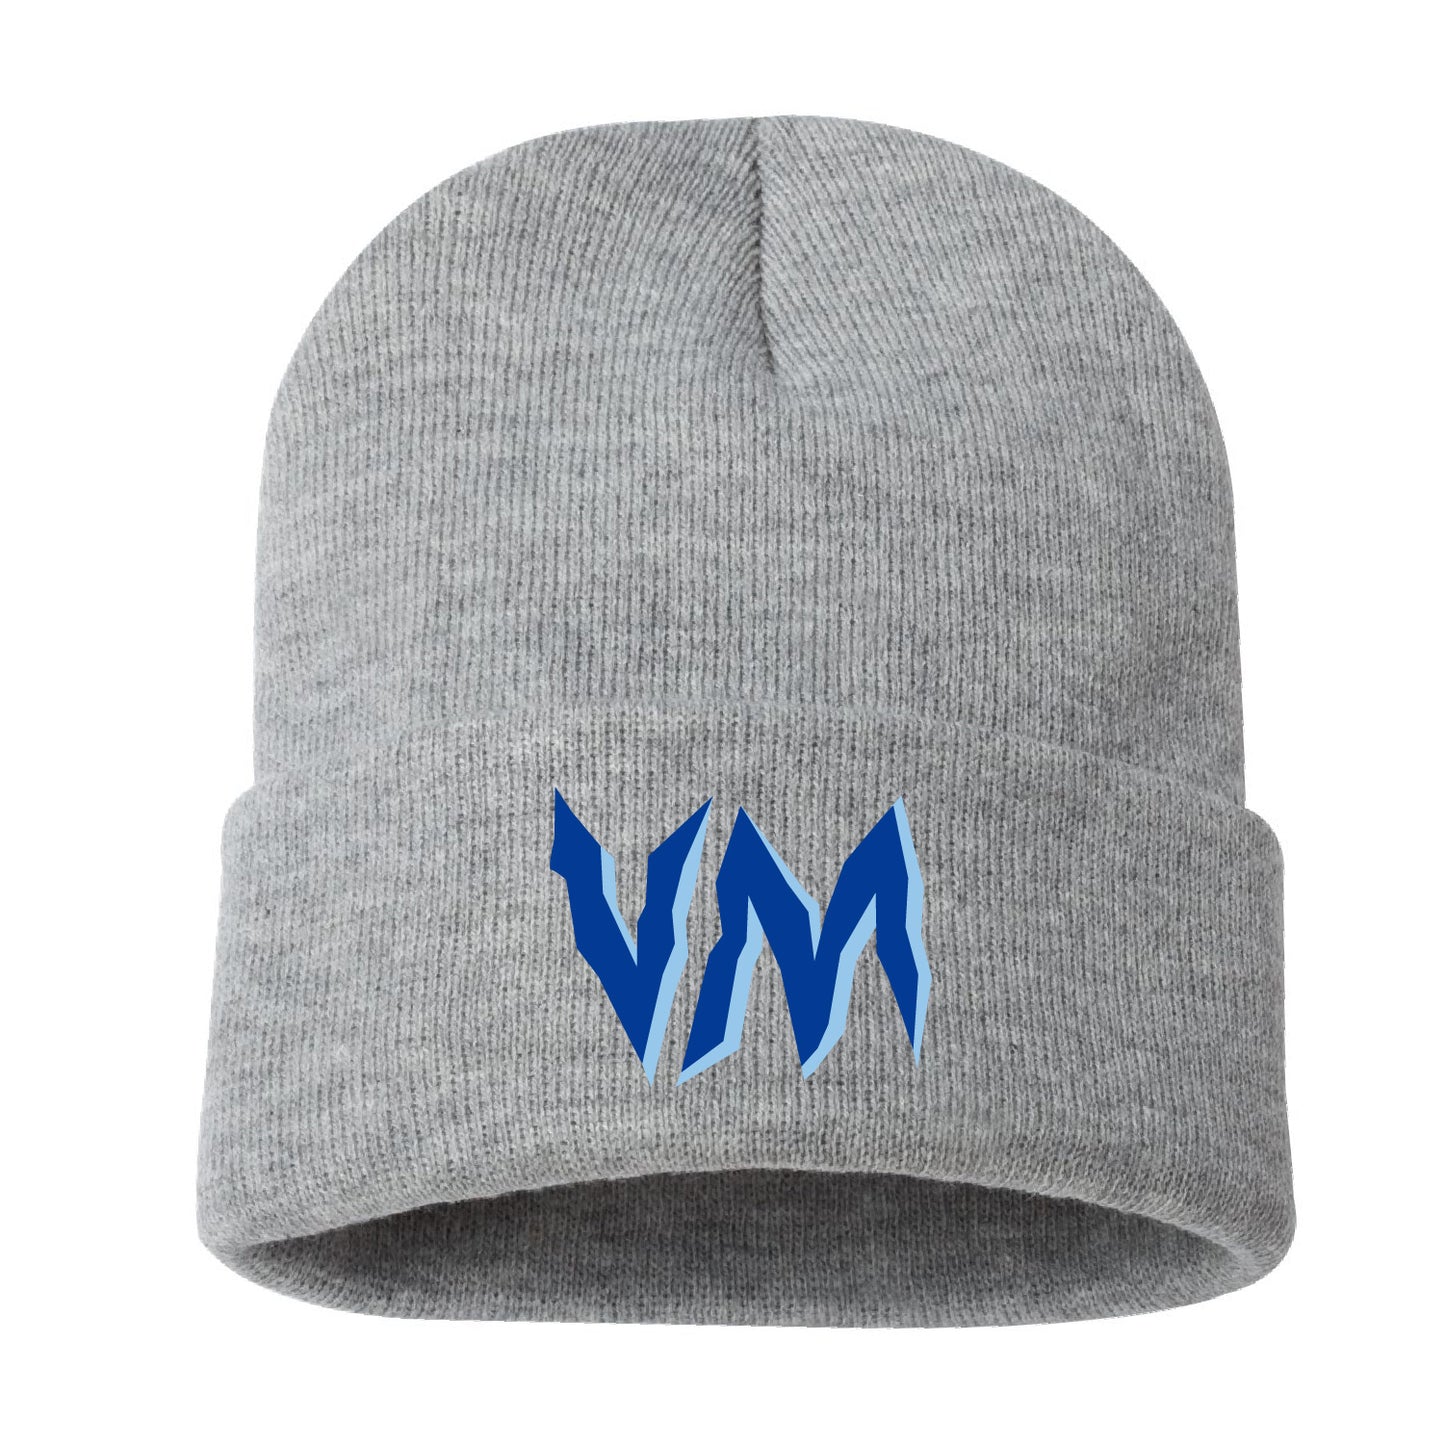 VM Cuffed Beanie with Embroidery (E1000-SP12)